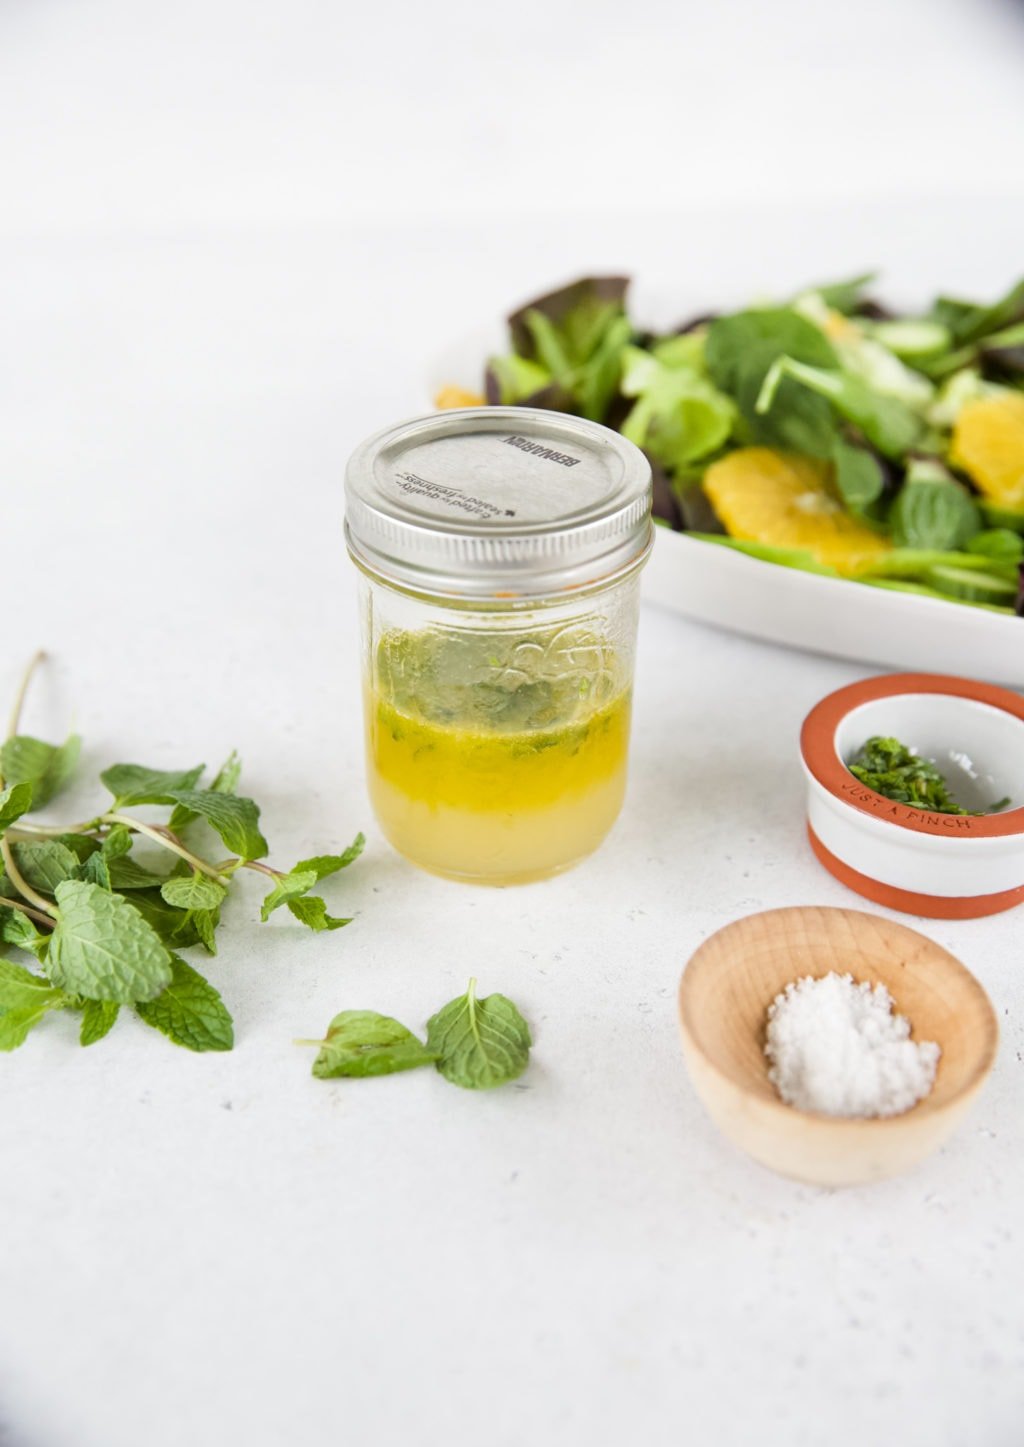 A small, 8 ounce mason jar is filled halfway with an olive oil based salad dressing. It sits on top of a white counter top. Mint leaves, a small bowl of salt, and a salad surround the jar.